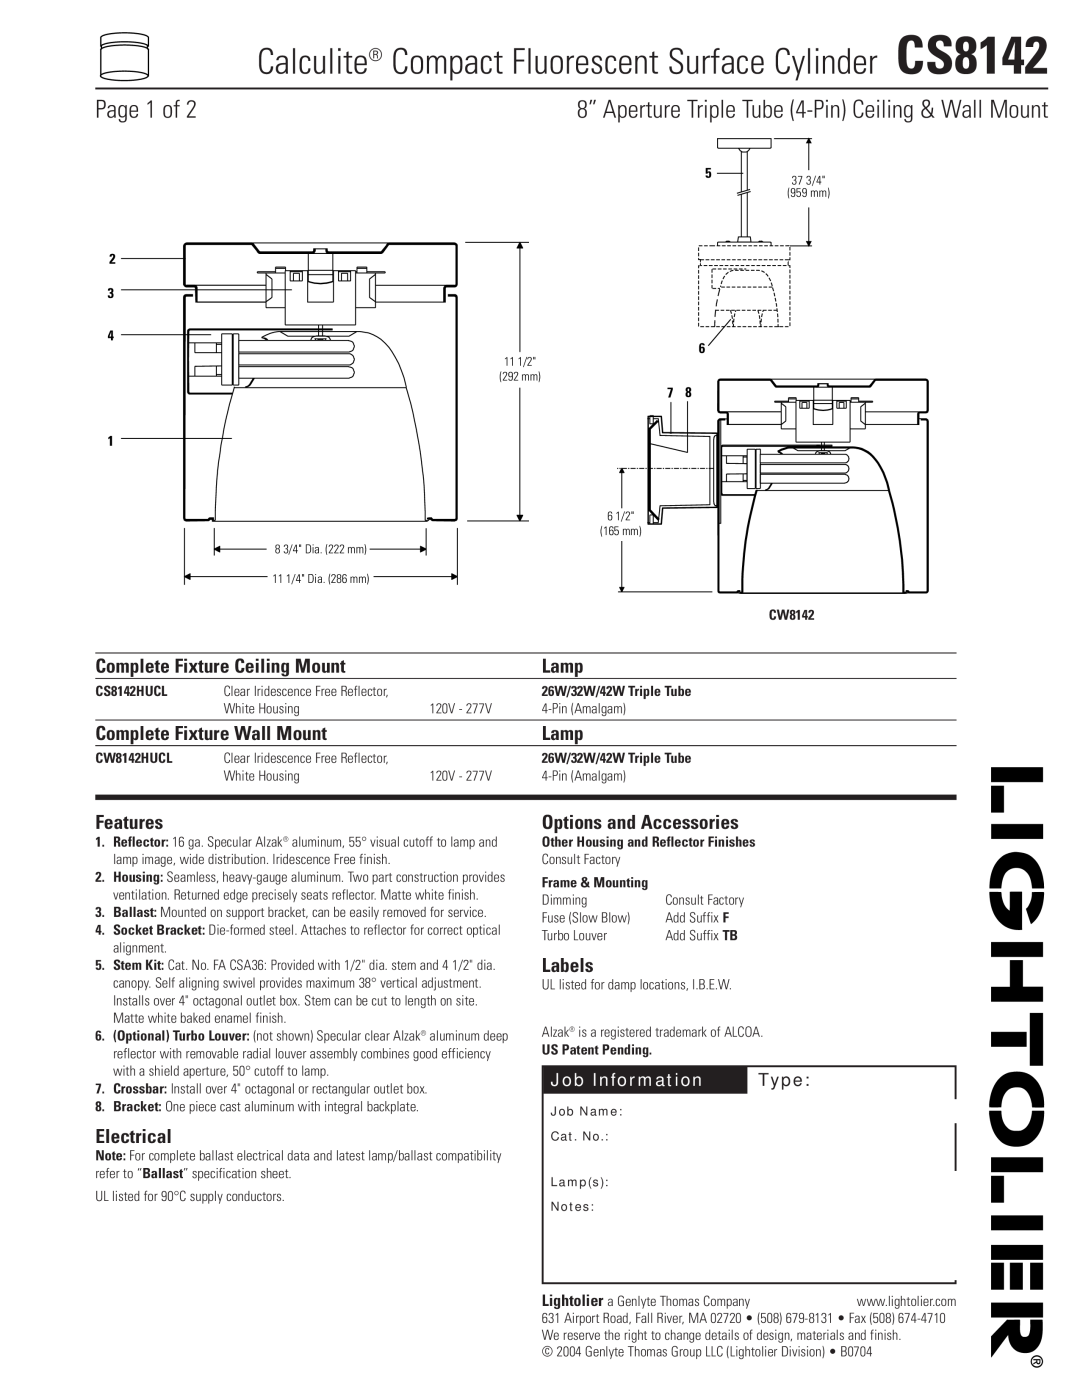 Lightolier CS8142 specifications Page 1 of, 8” Aperture Triple Tube 4-PinCeiling & Wall Mount, Job Information, Type, Lamp 